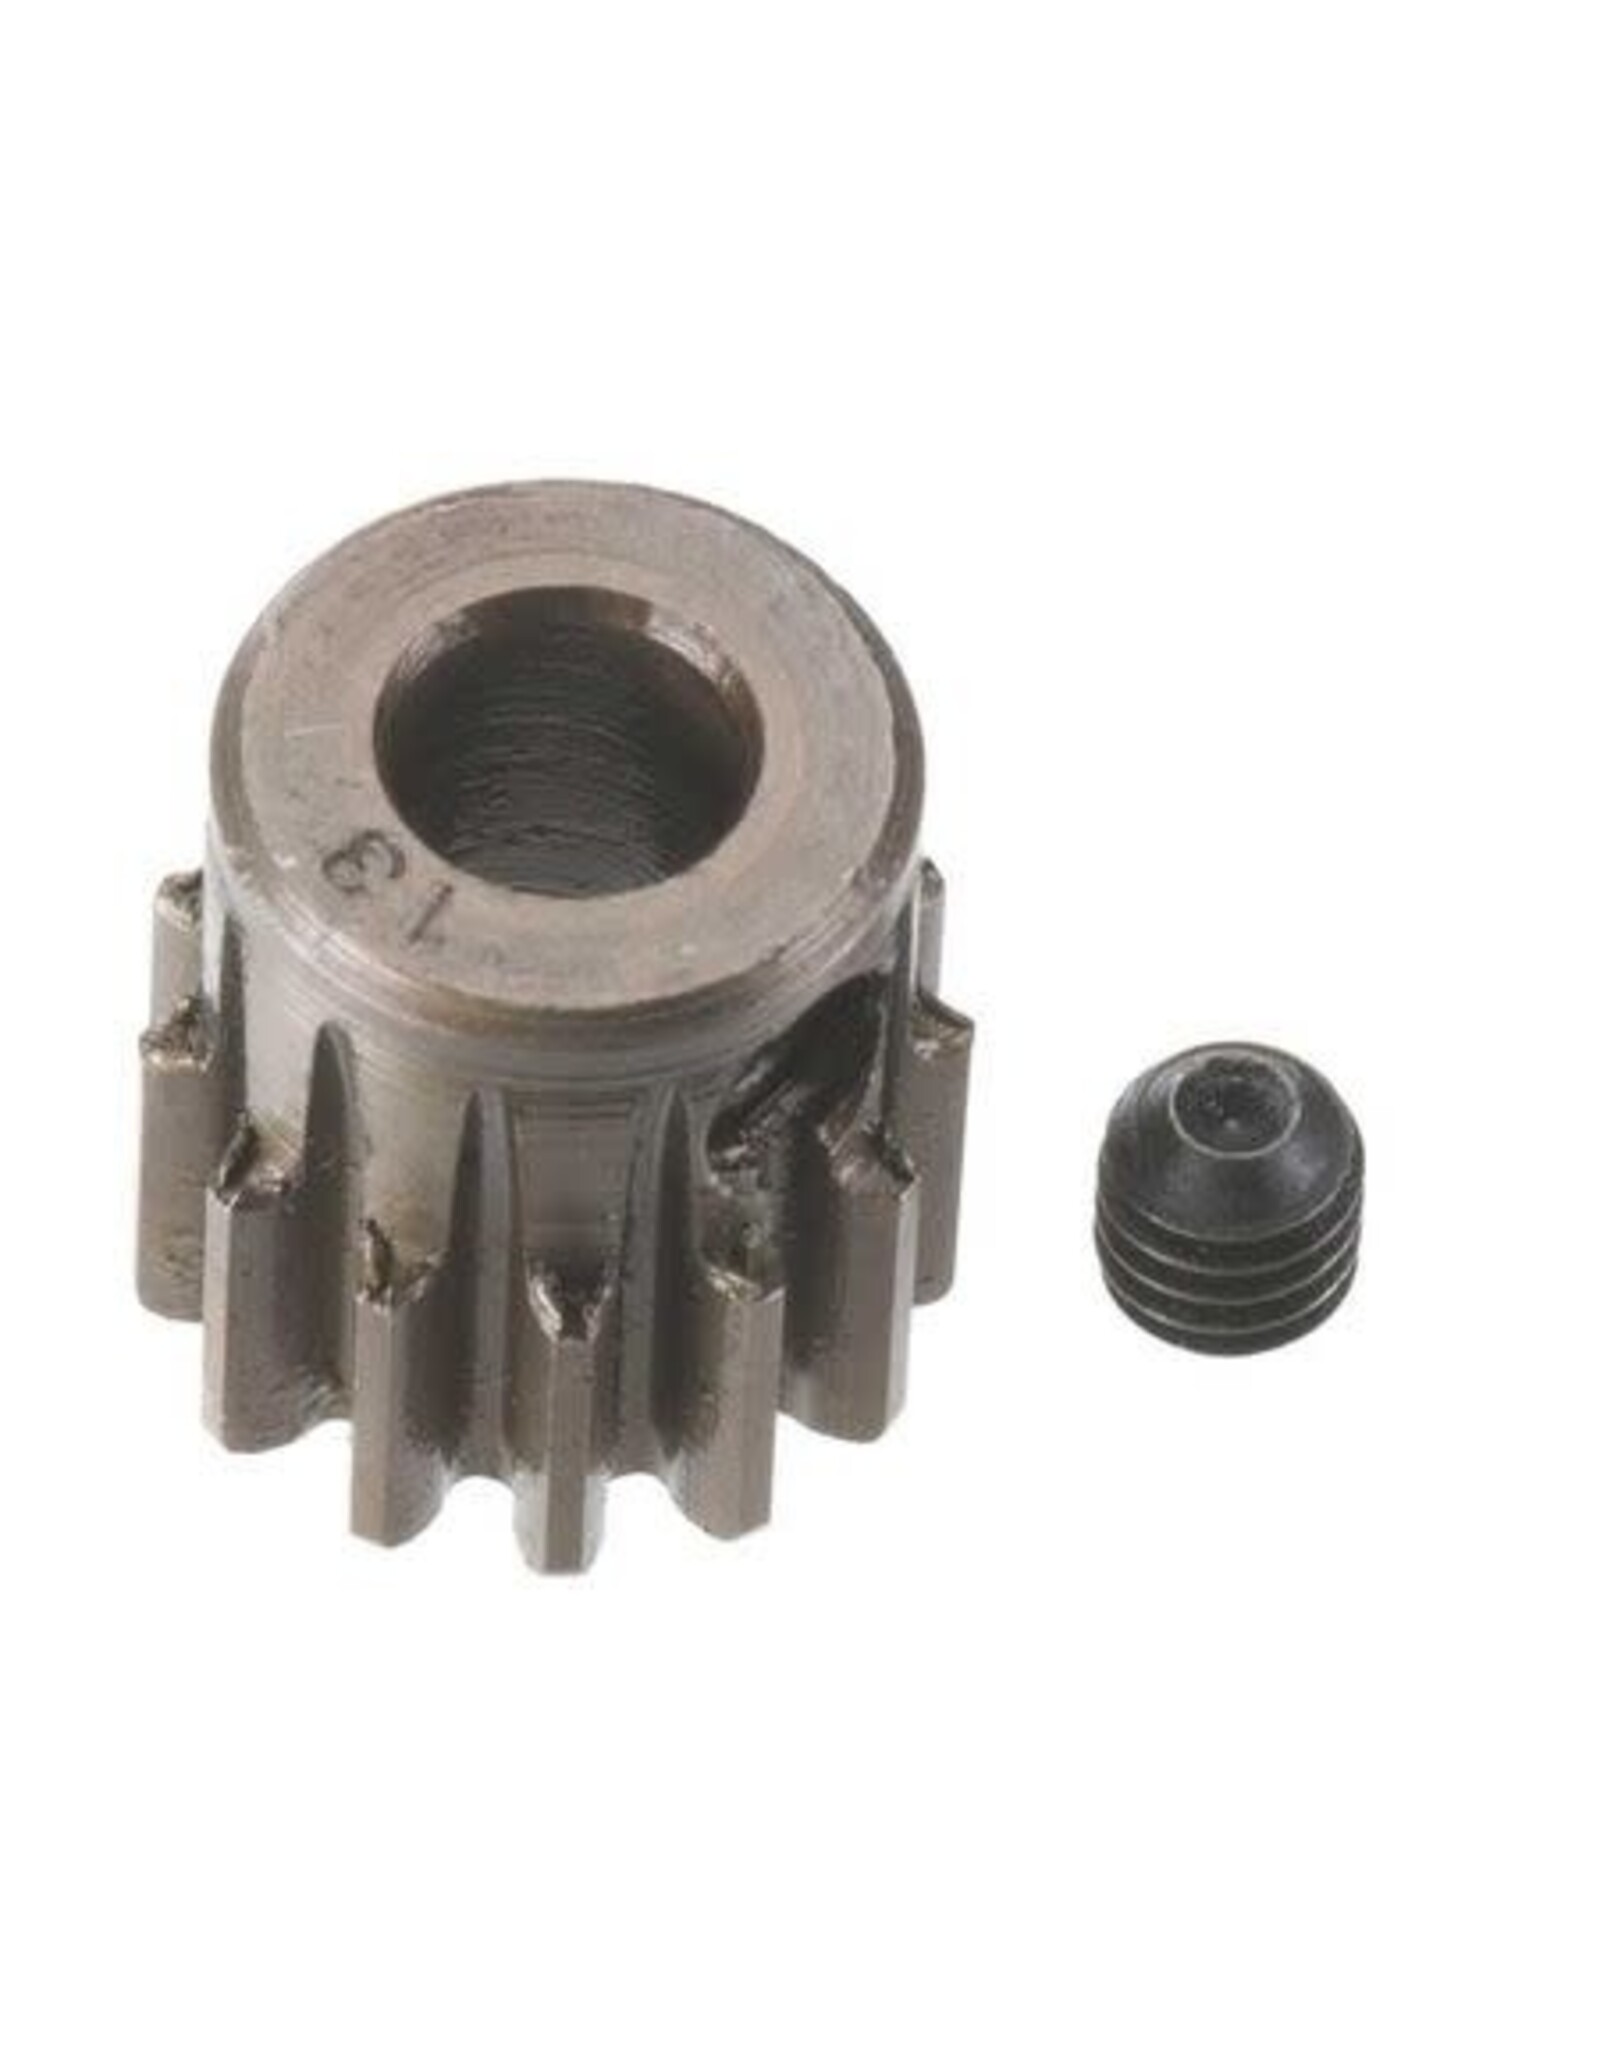 Robinson Racing Products Extra Hard 5mm Bore .8Mod Pinion 13T